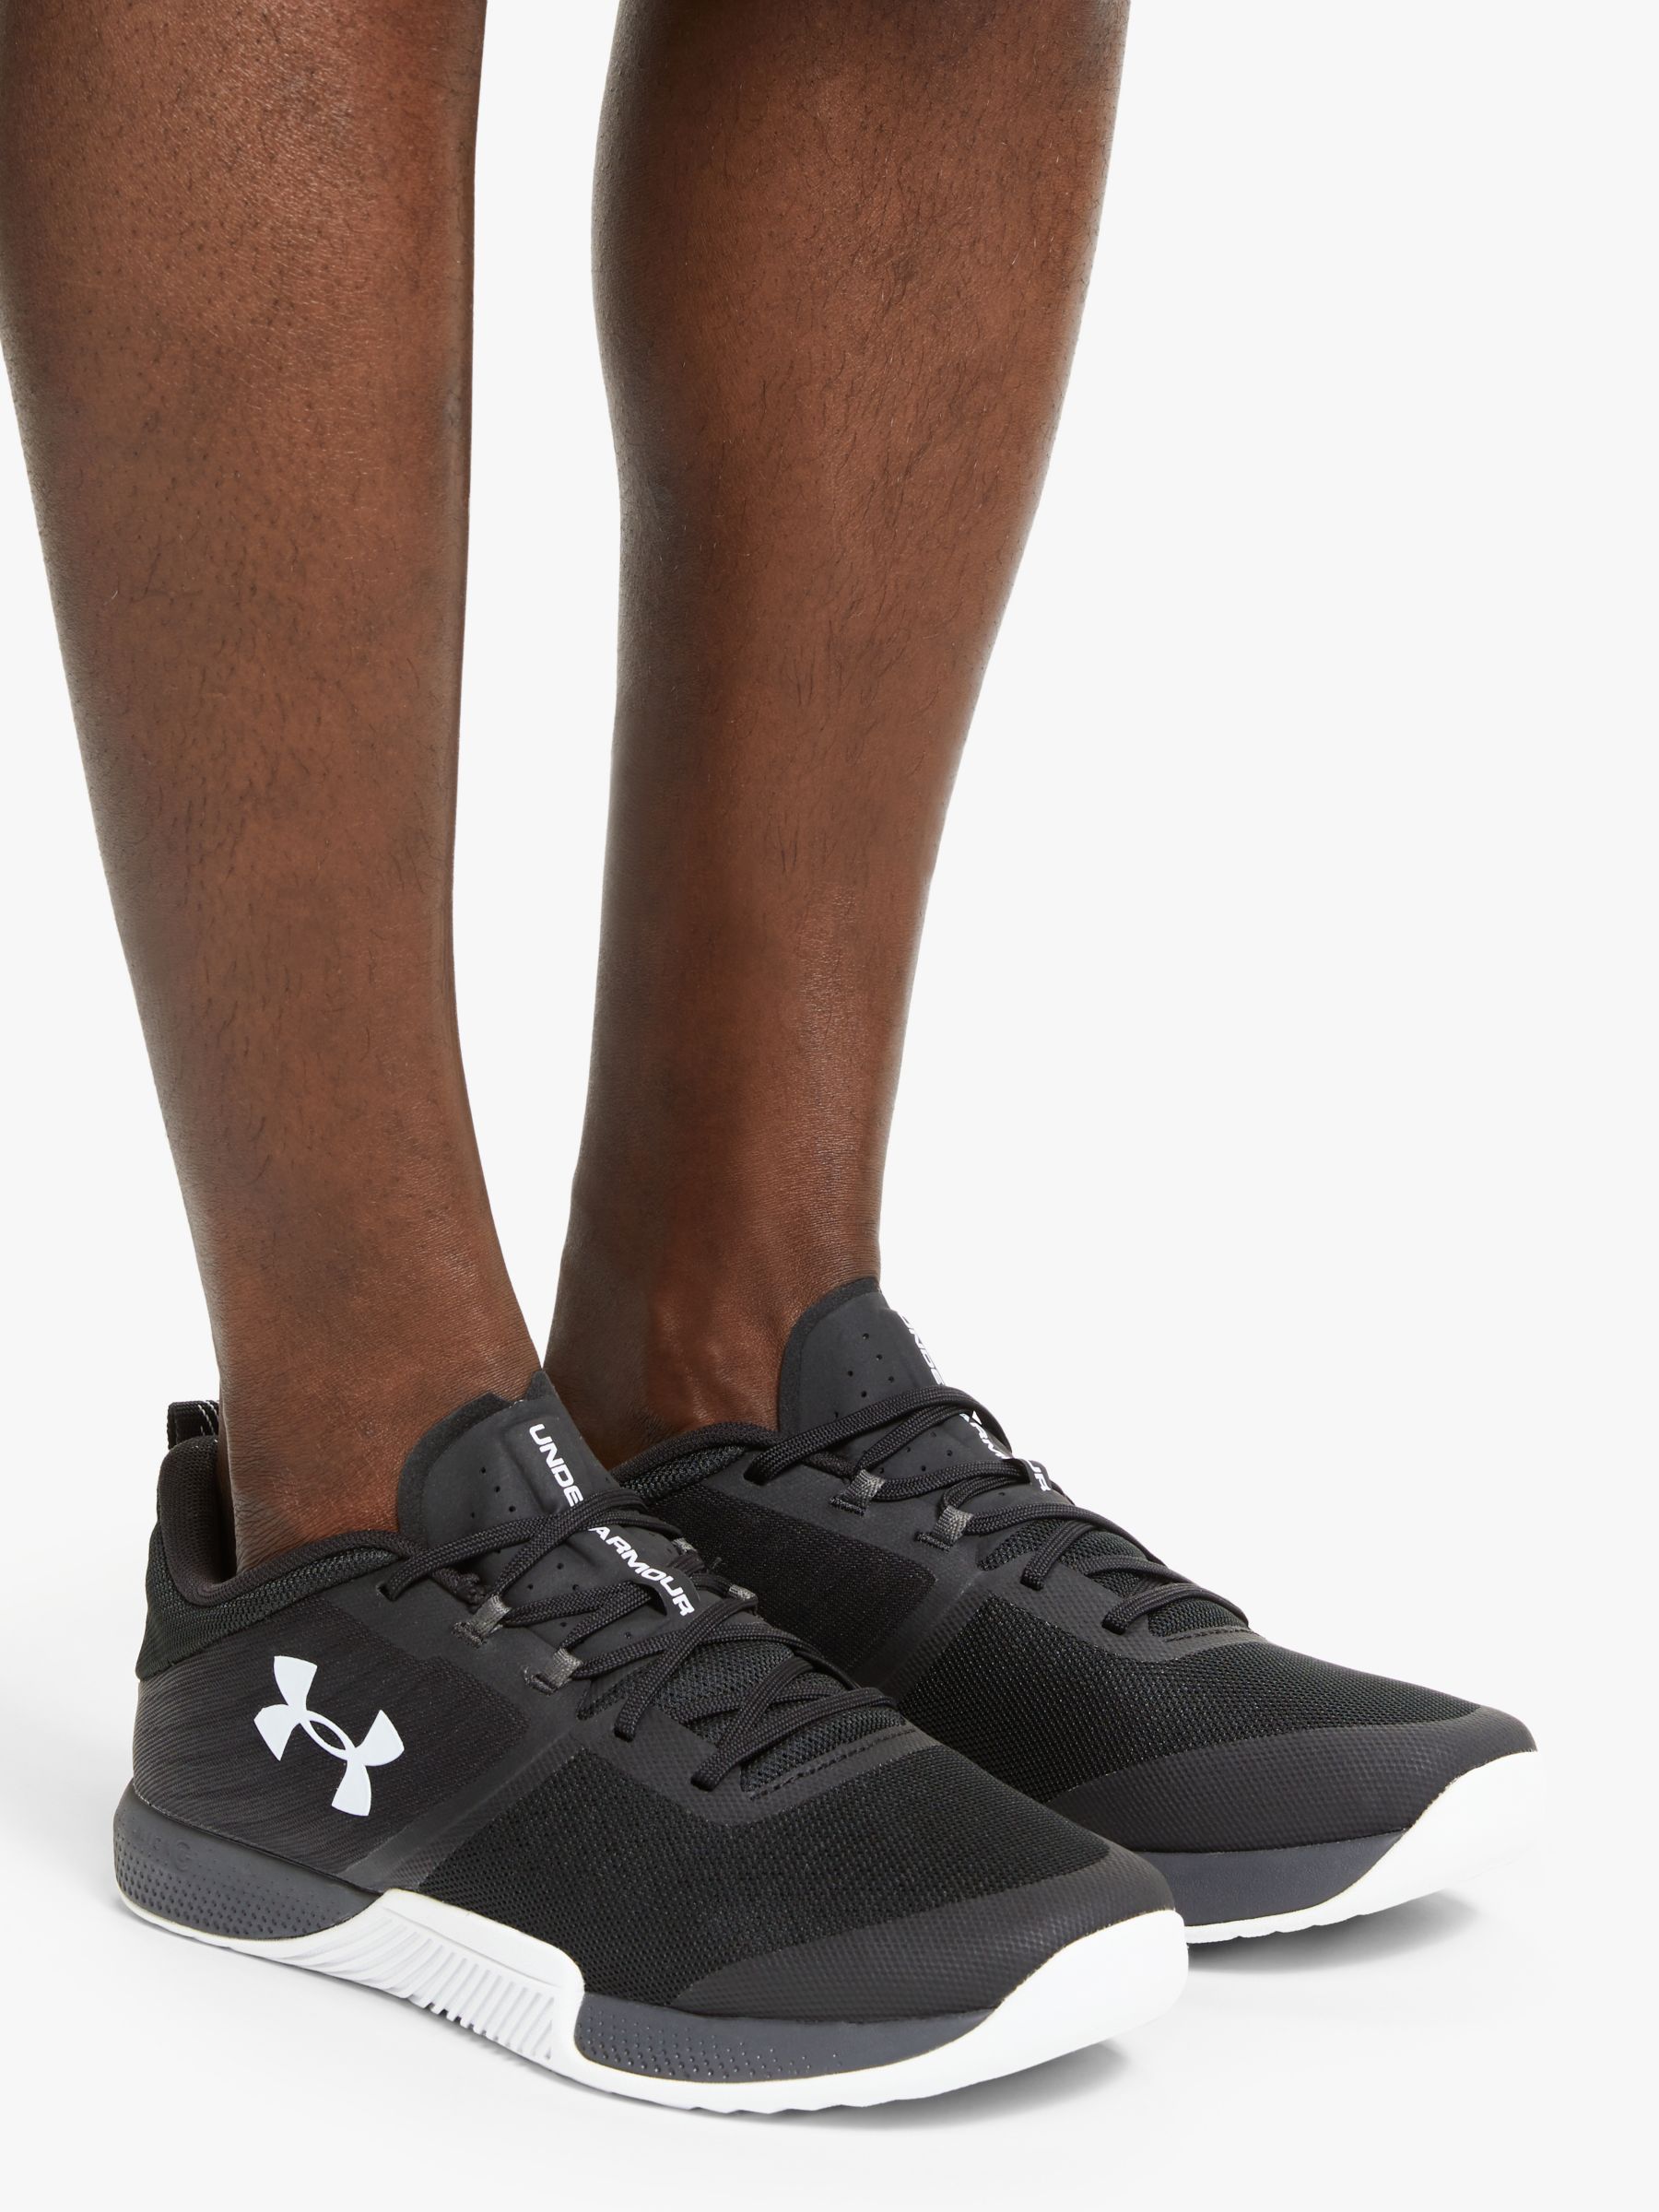 under armour tribase review